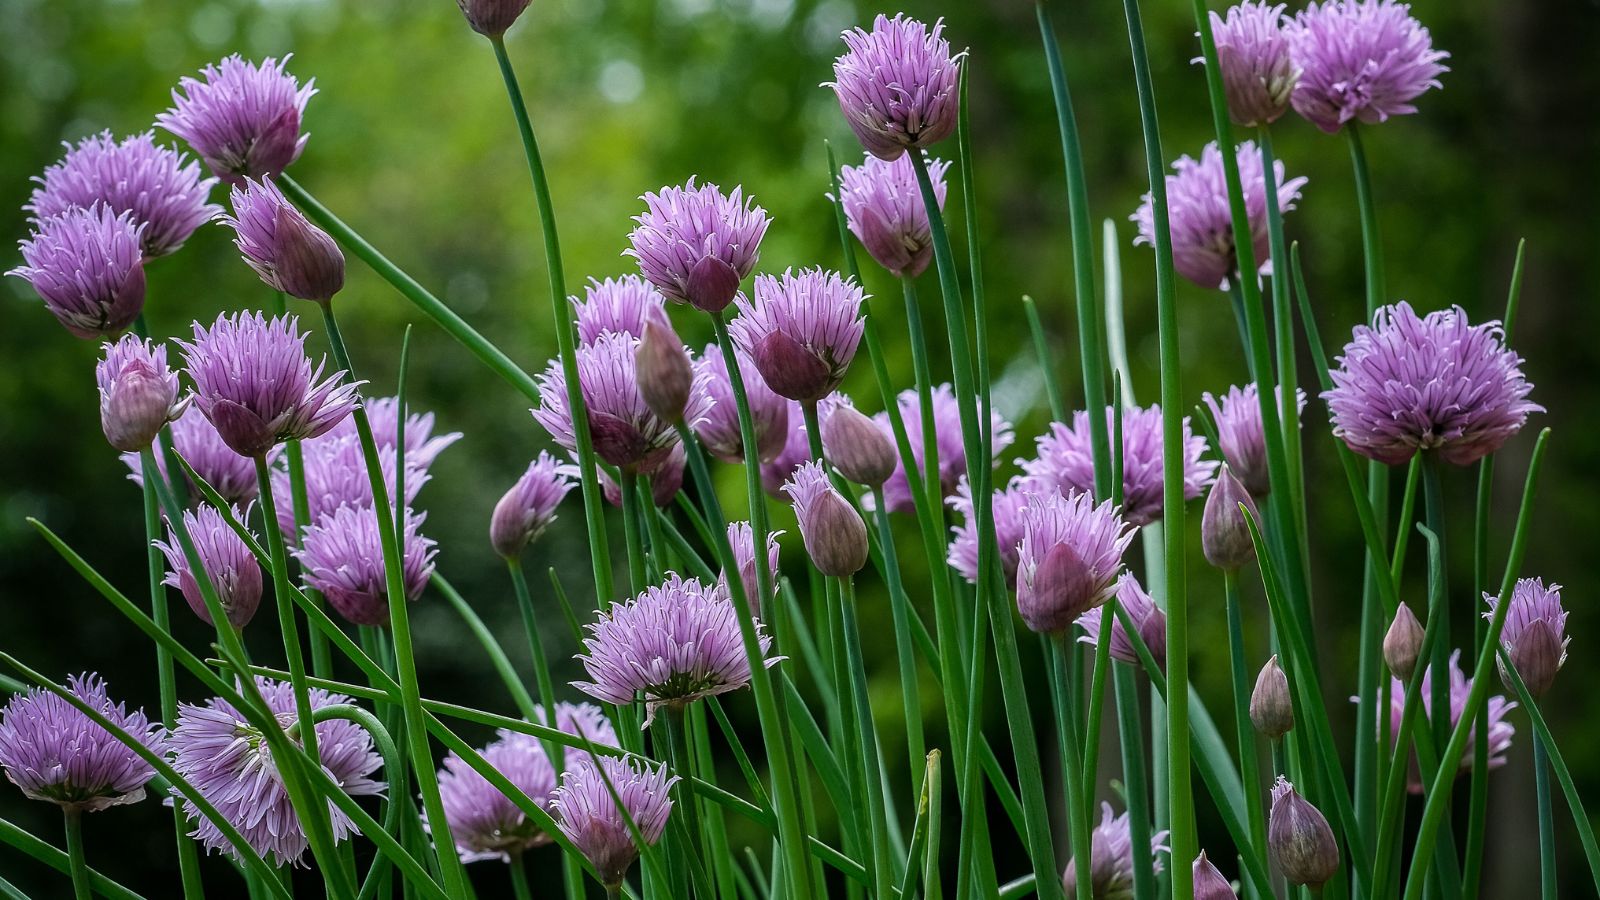 Chives flowers grown in a garden.